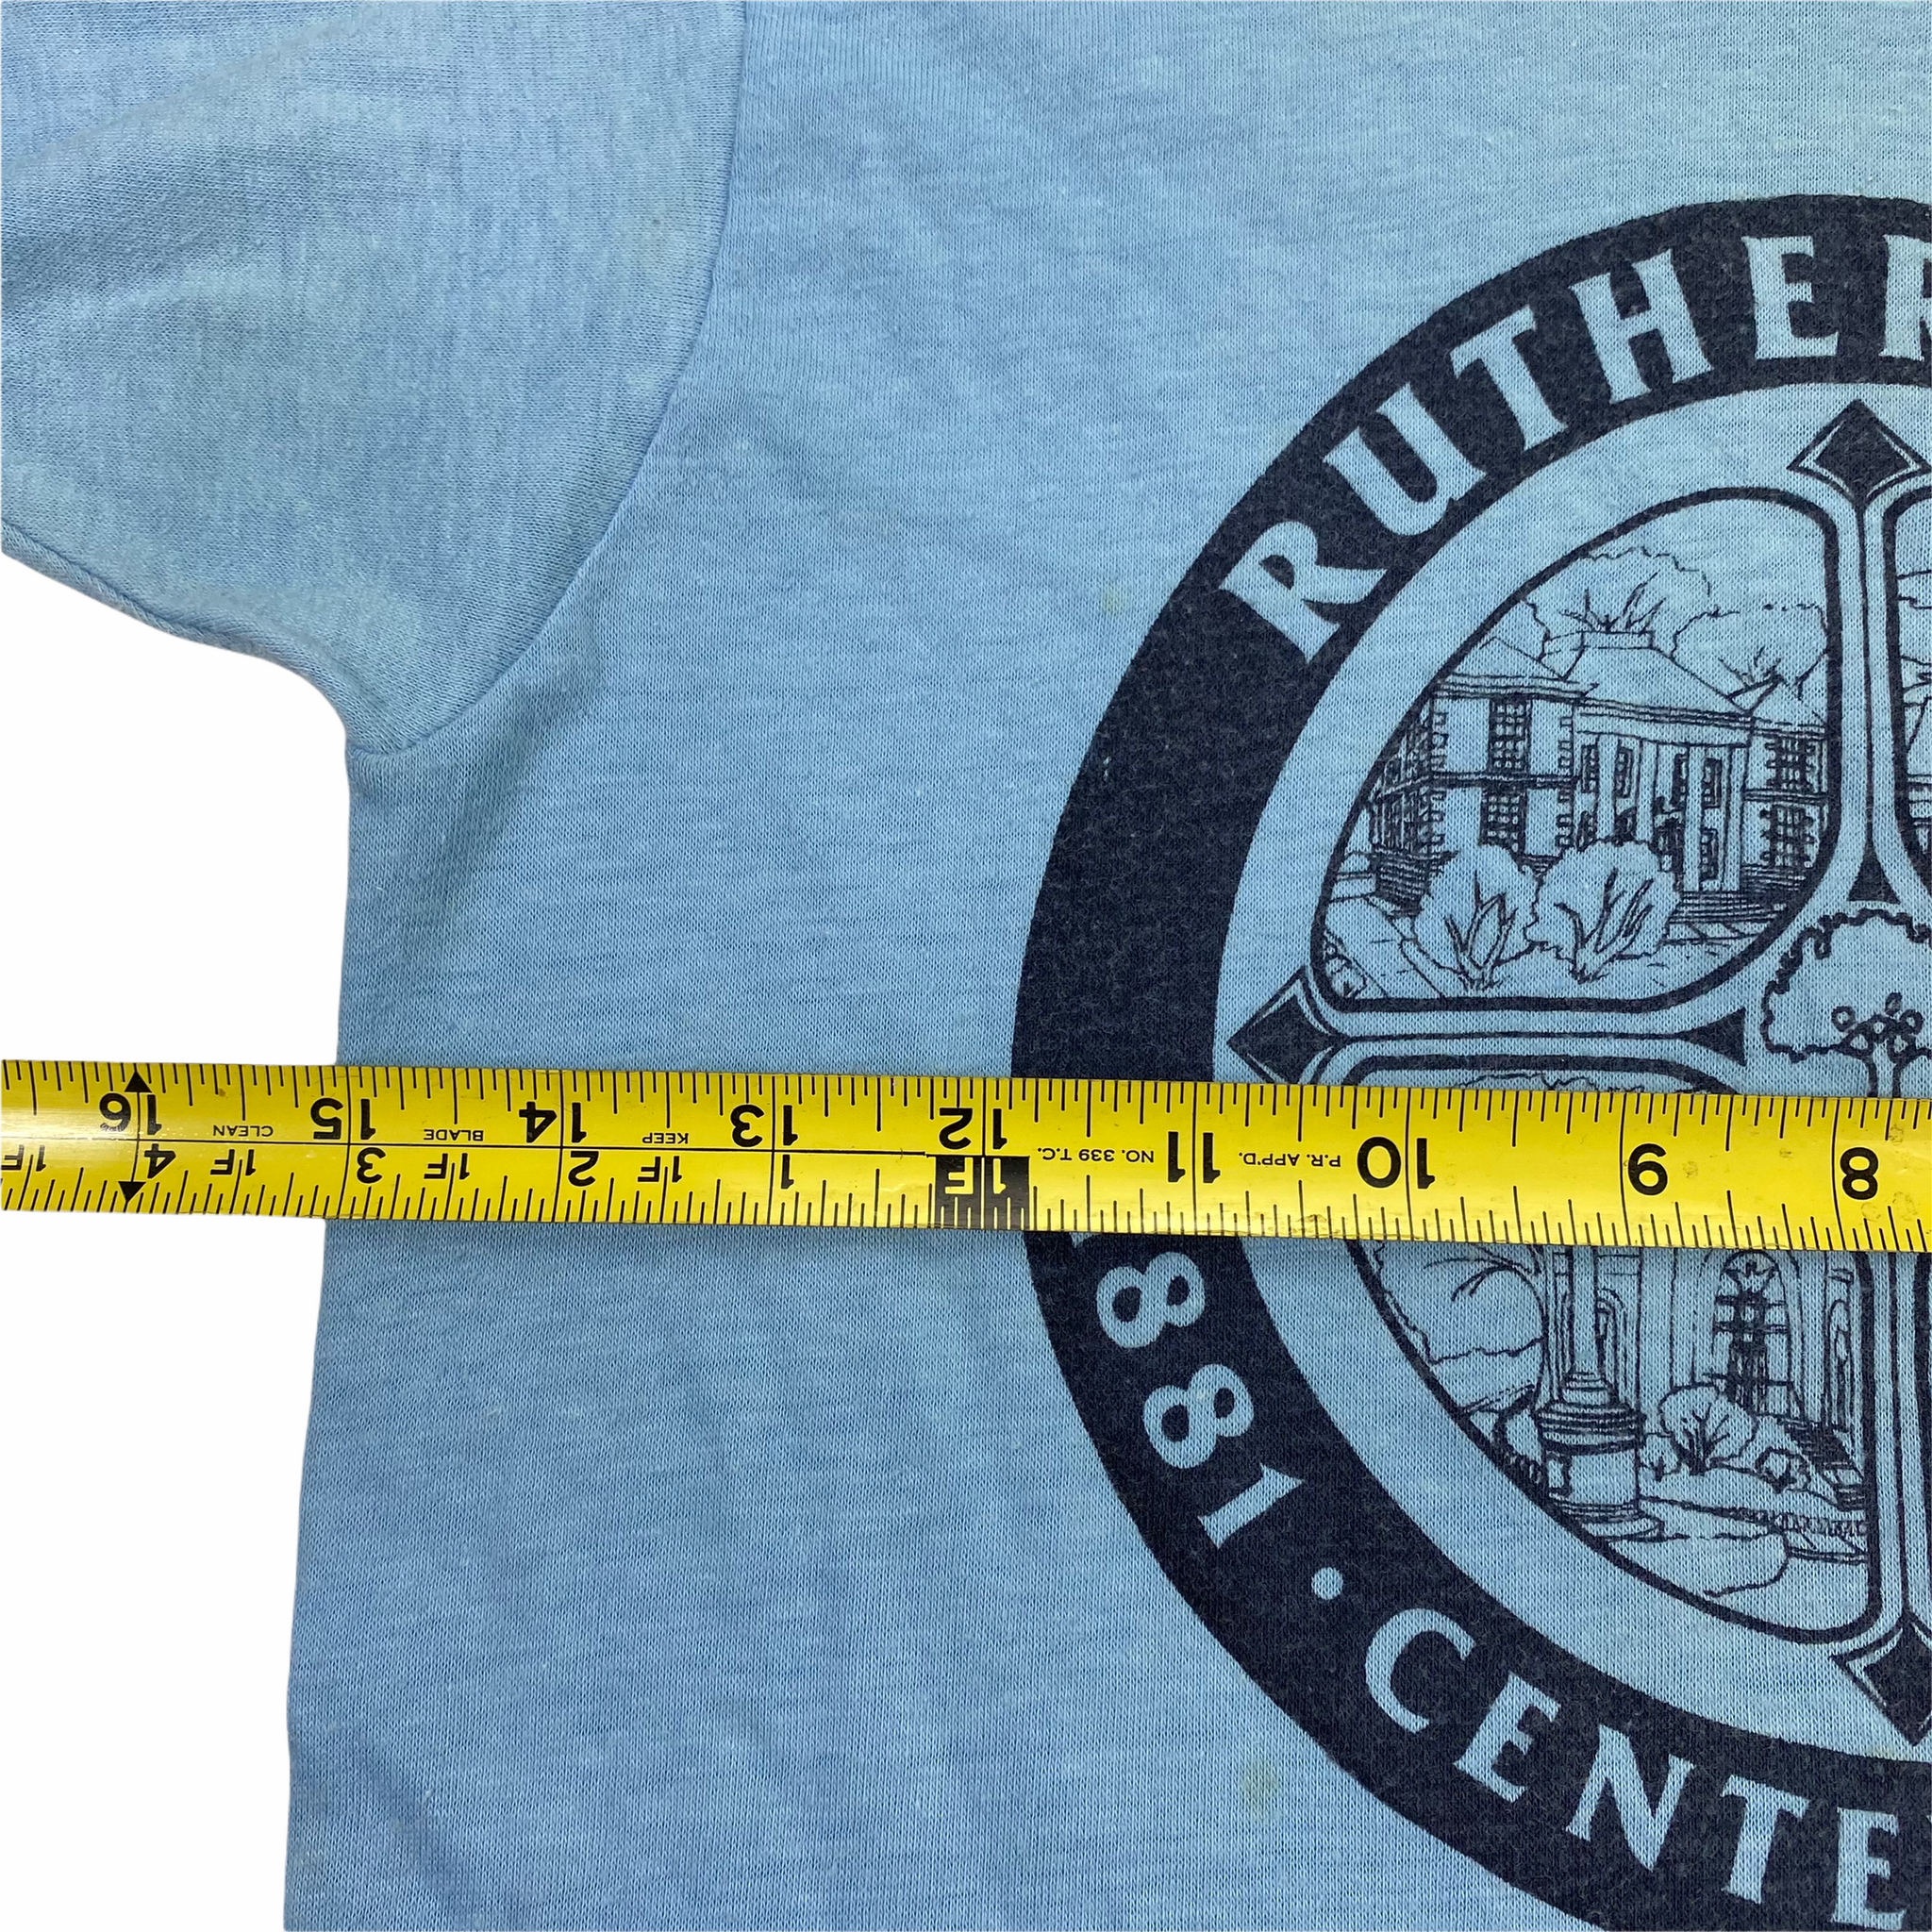 1981 Rutherford tee. Small